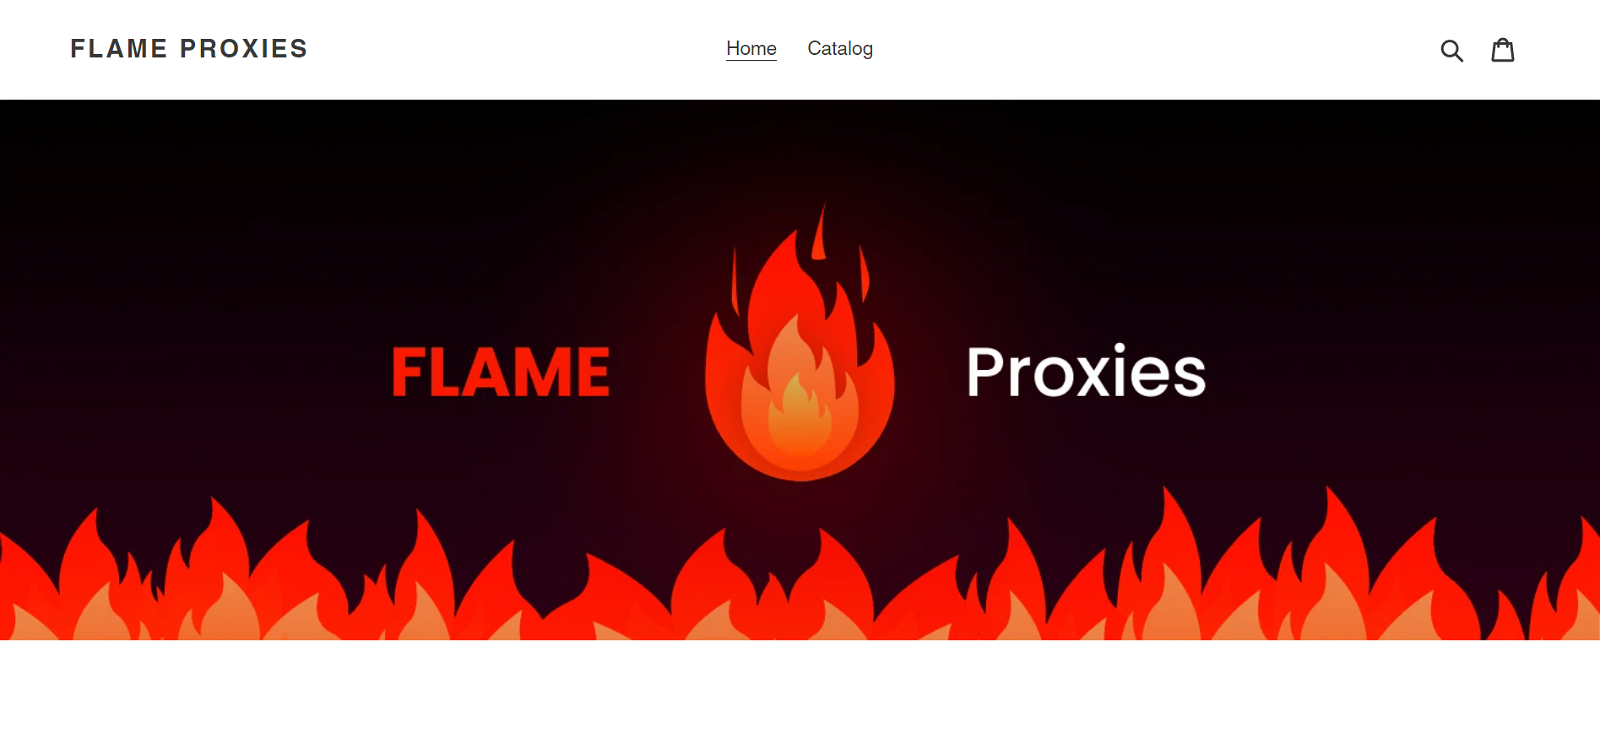 Flame Poxies sneaker proxy residential proxies datacenter